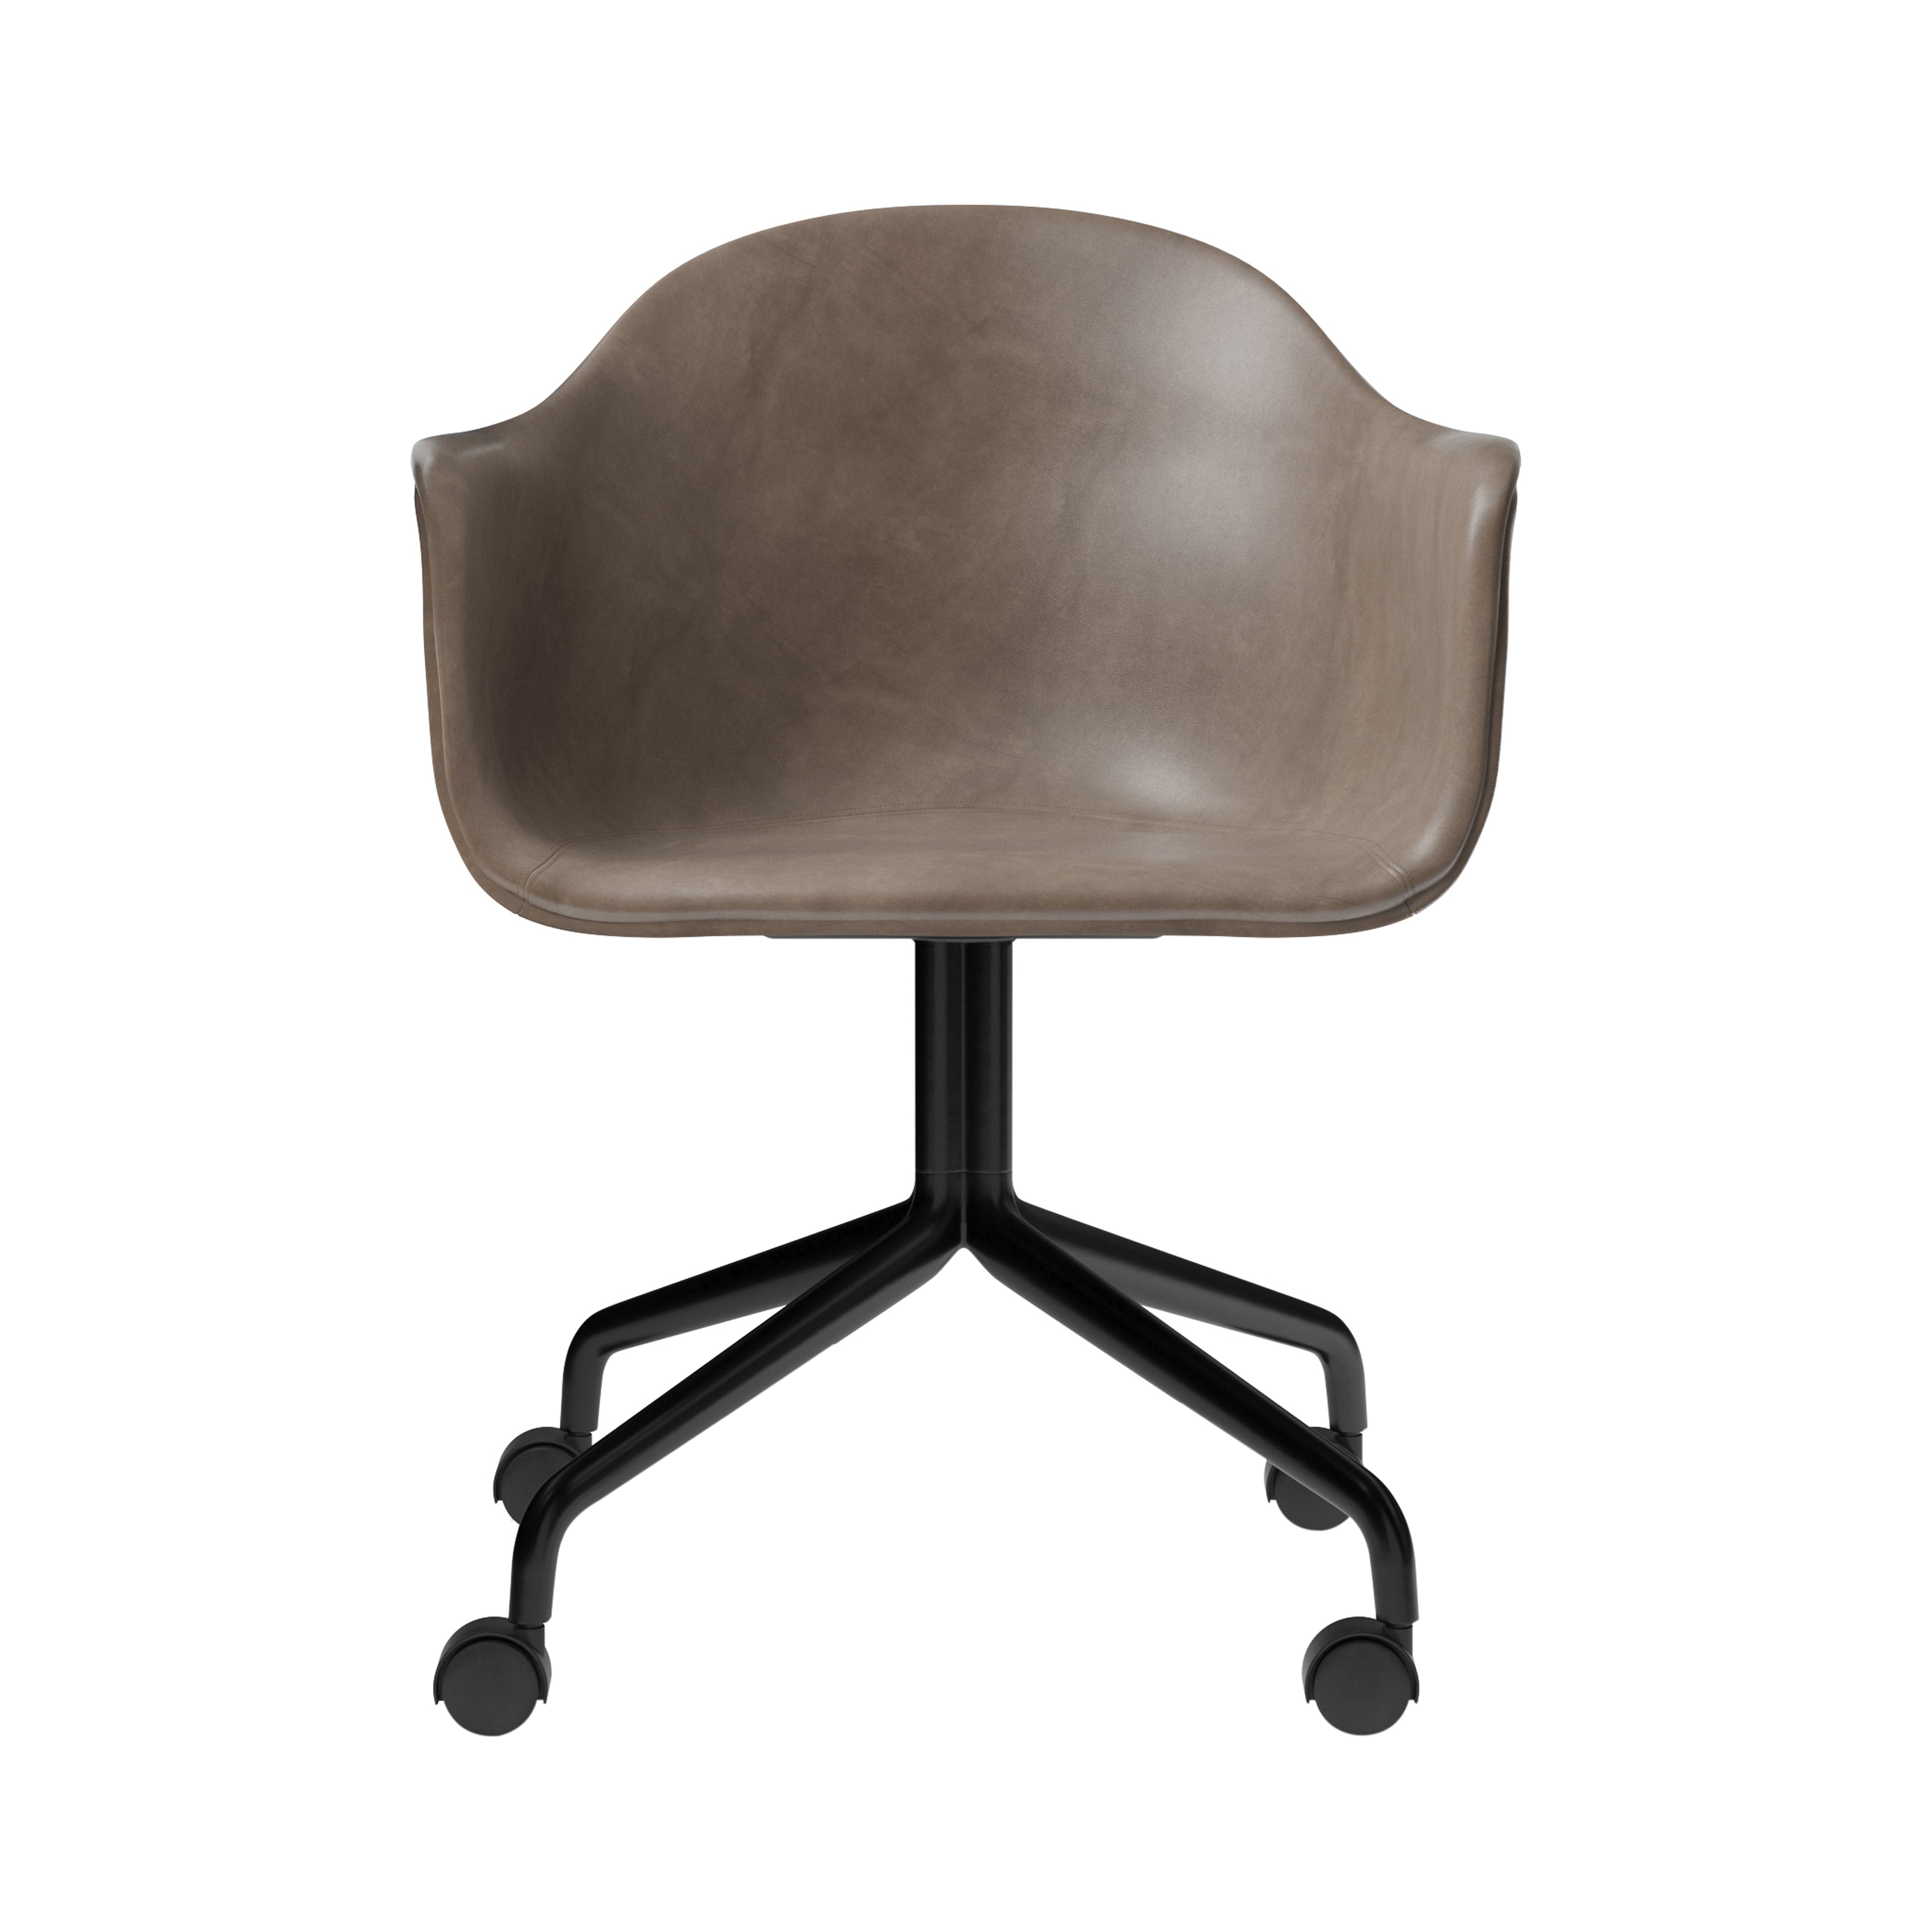 Harbour Dining Chair Star Base with Casters: Upholstered + Black Steel + Dakar 0311